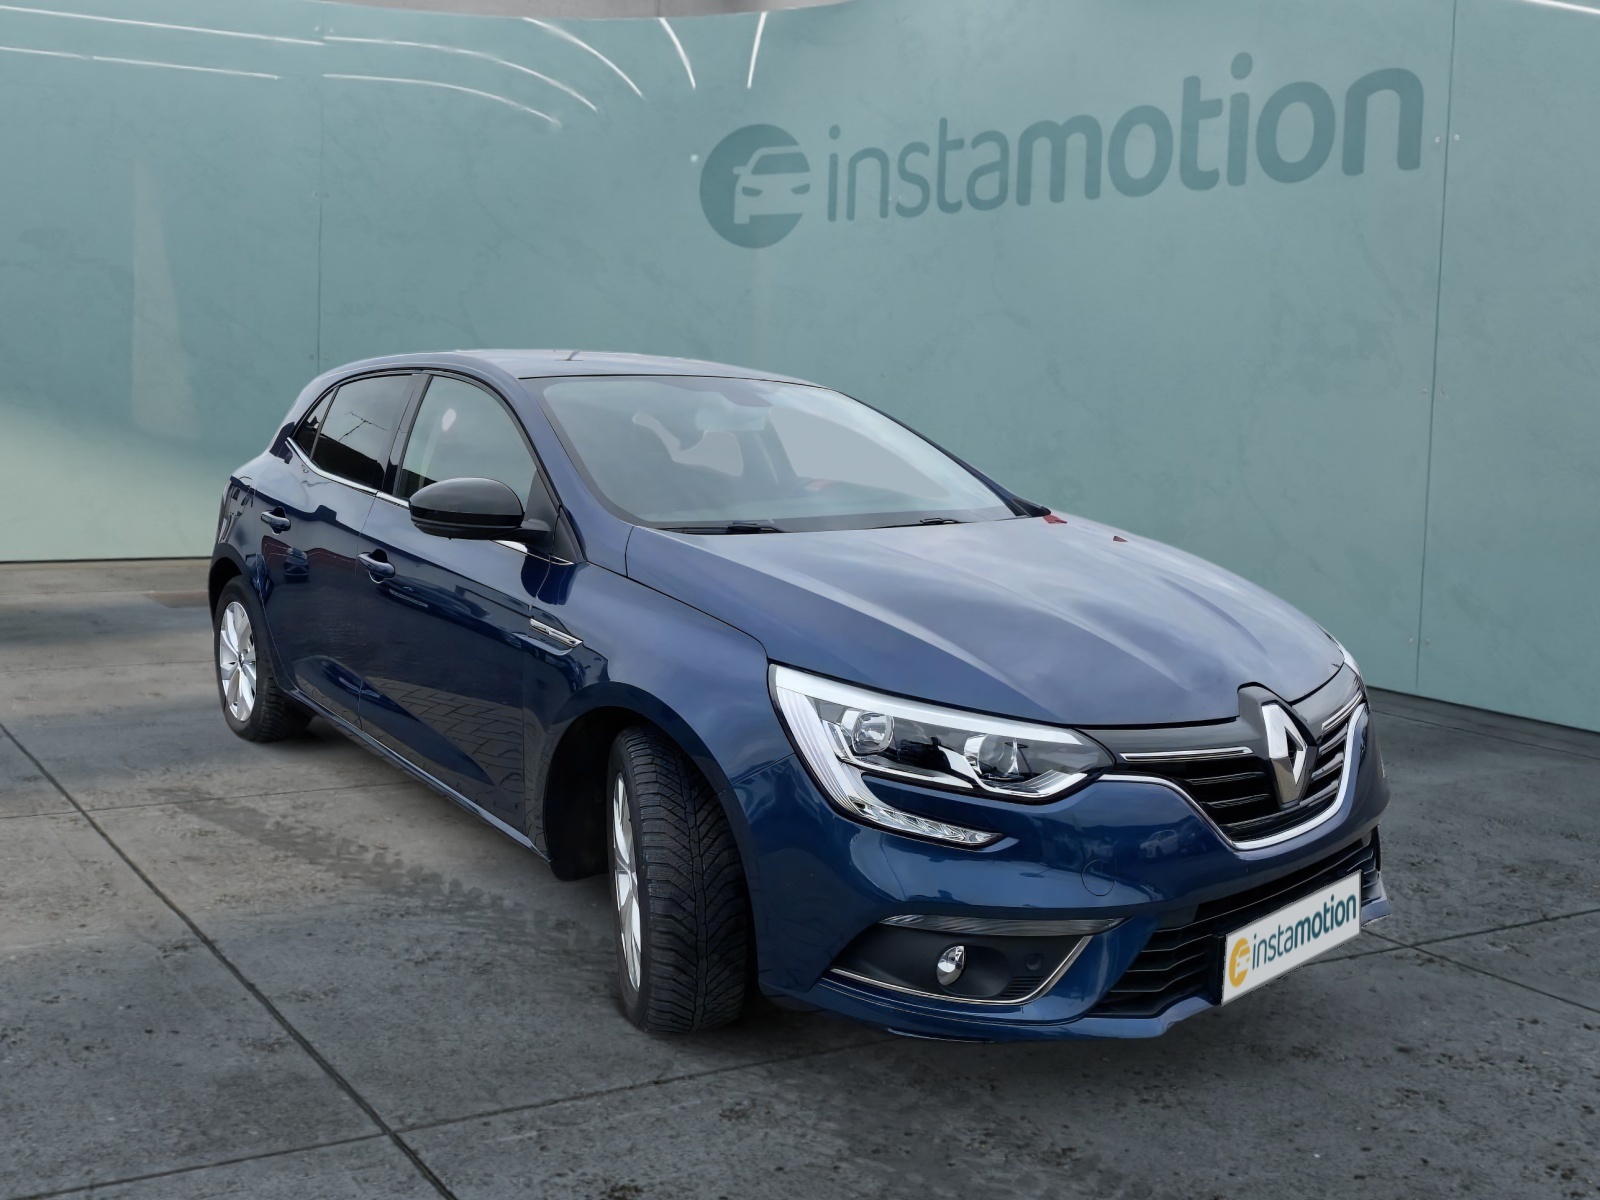 Renault Megane LIMITED Deluxe TCe 115 GPF ES